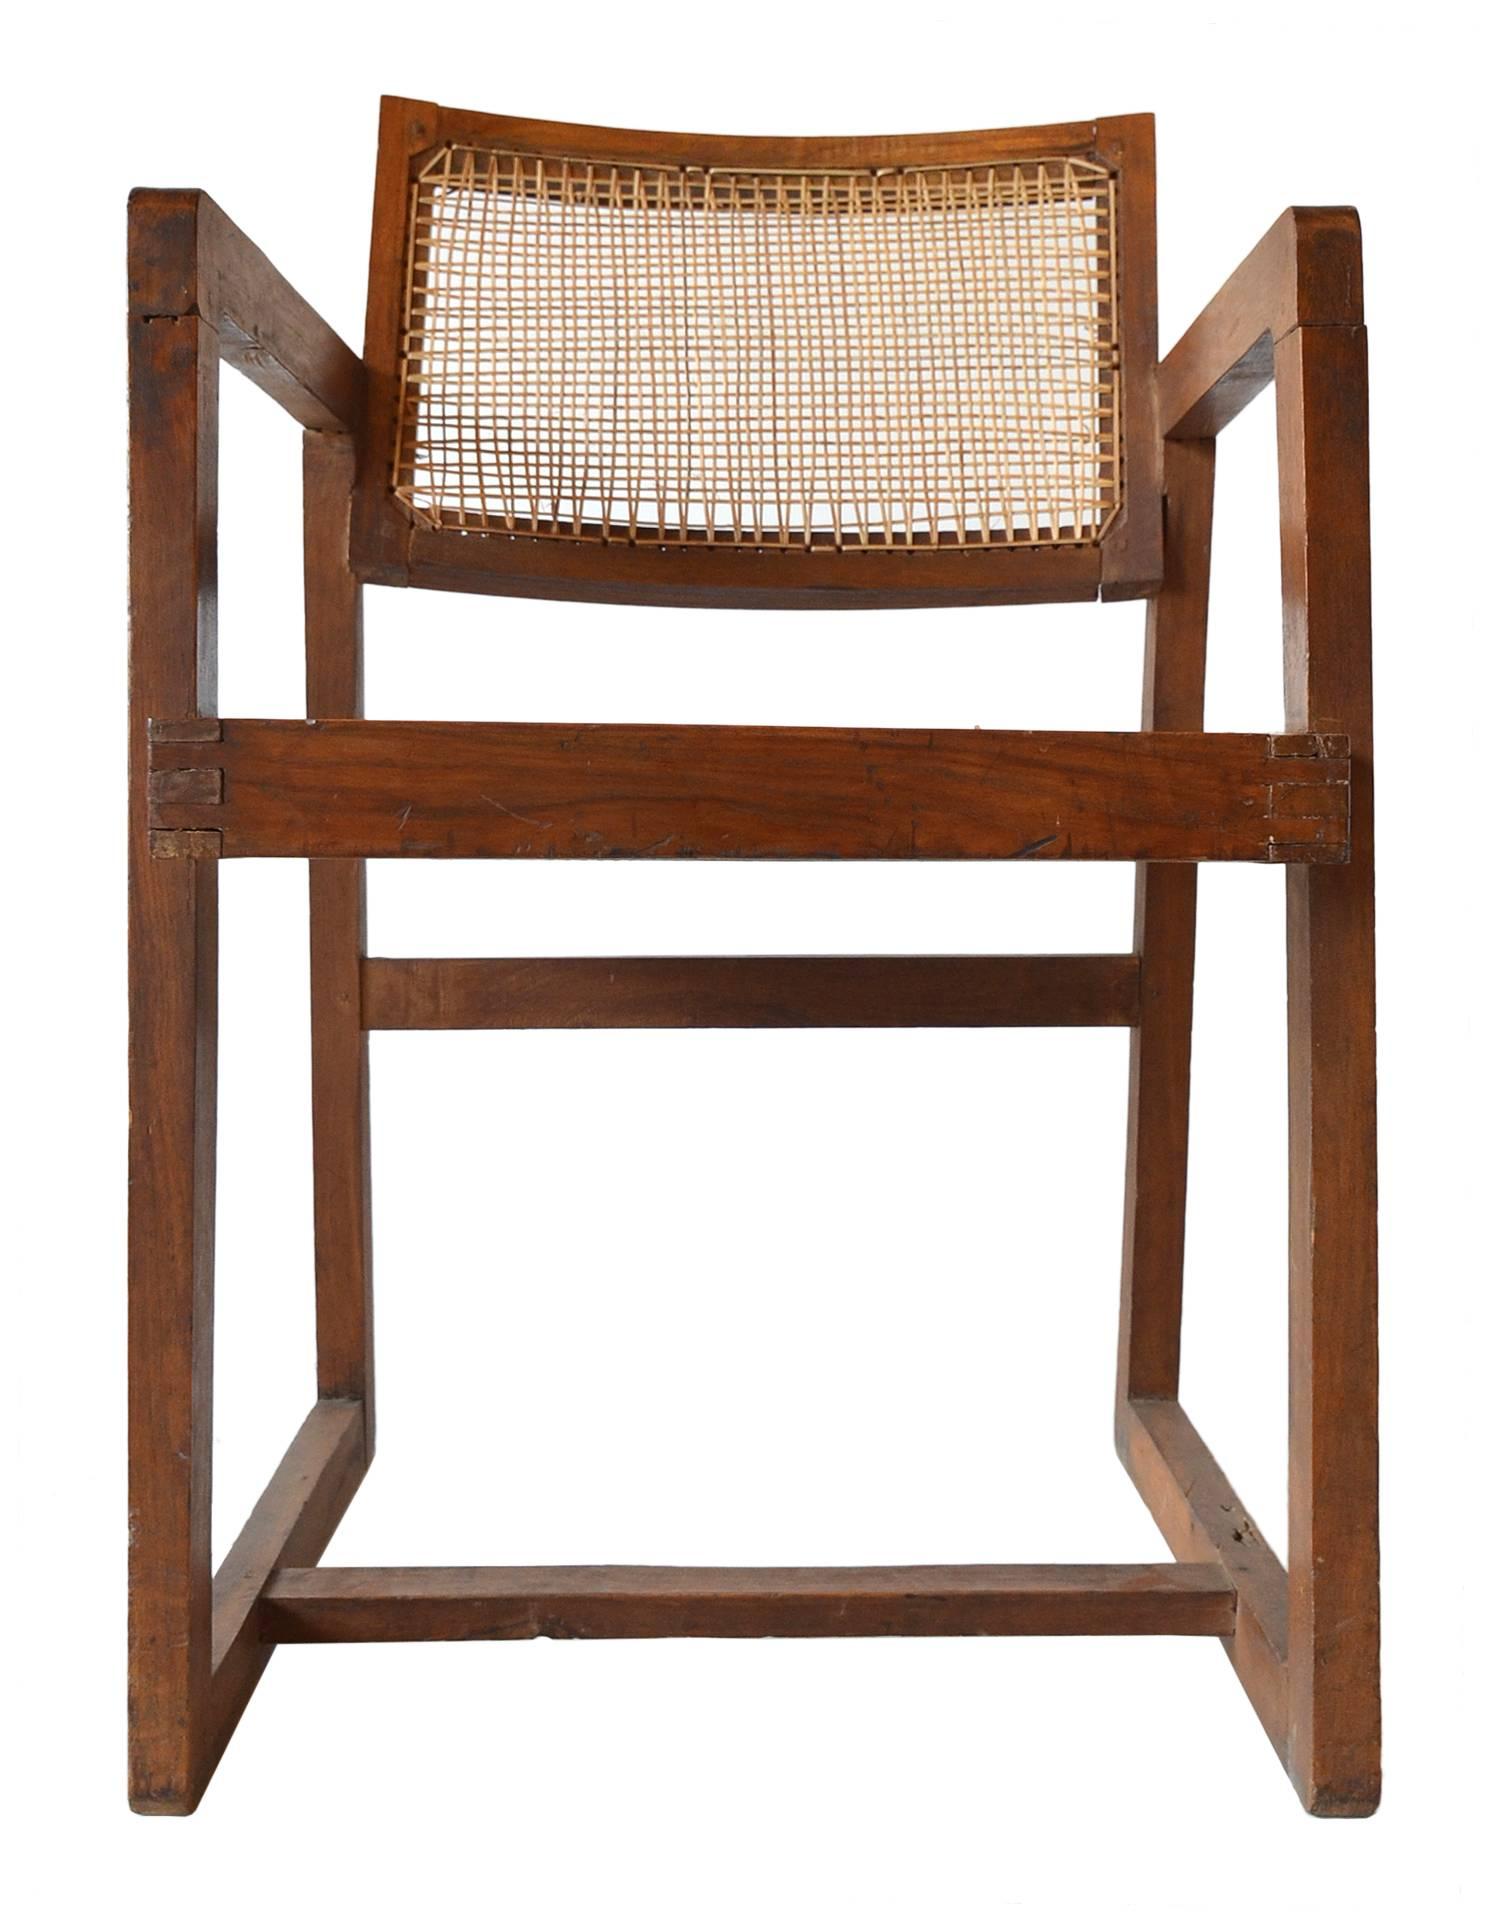 A teak armchair made for the Punjab University in Chandigarh, India, circa 1960.
Model number PJ-SI-53-A
This rare chair is in original as found condition. Only wax and oil have been applied to preserve the original patina and history.
Re-caned